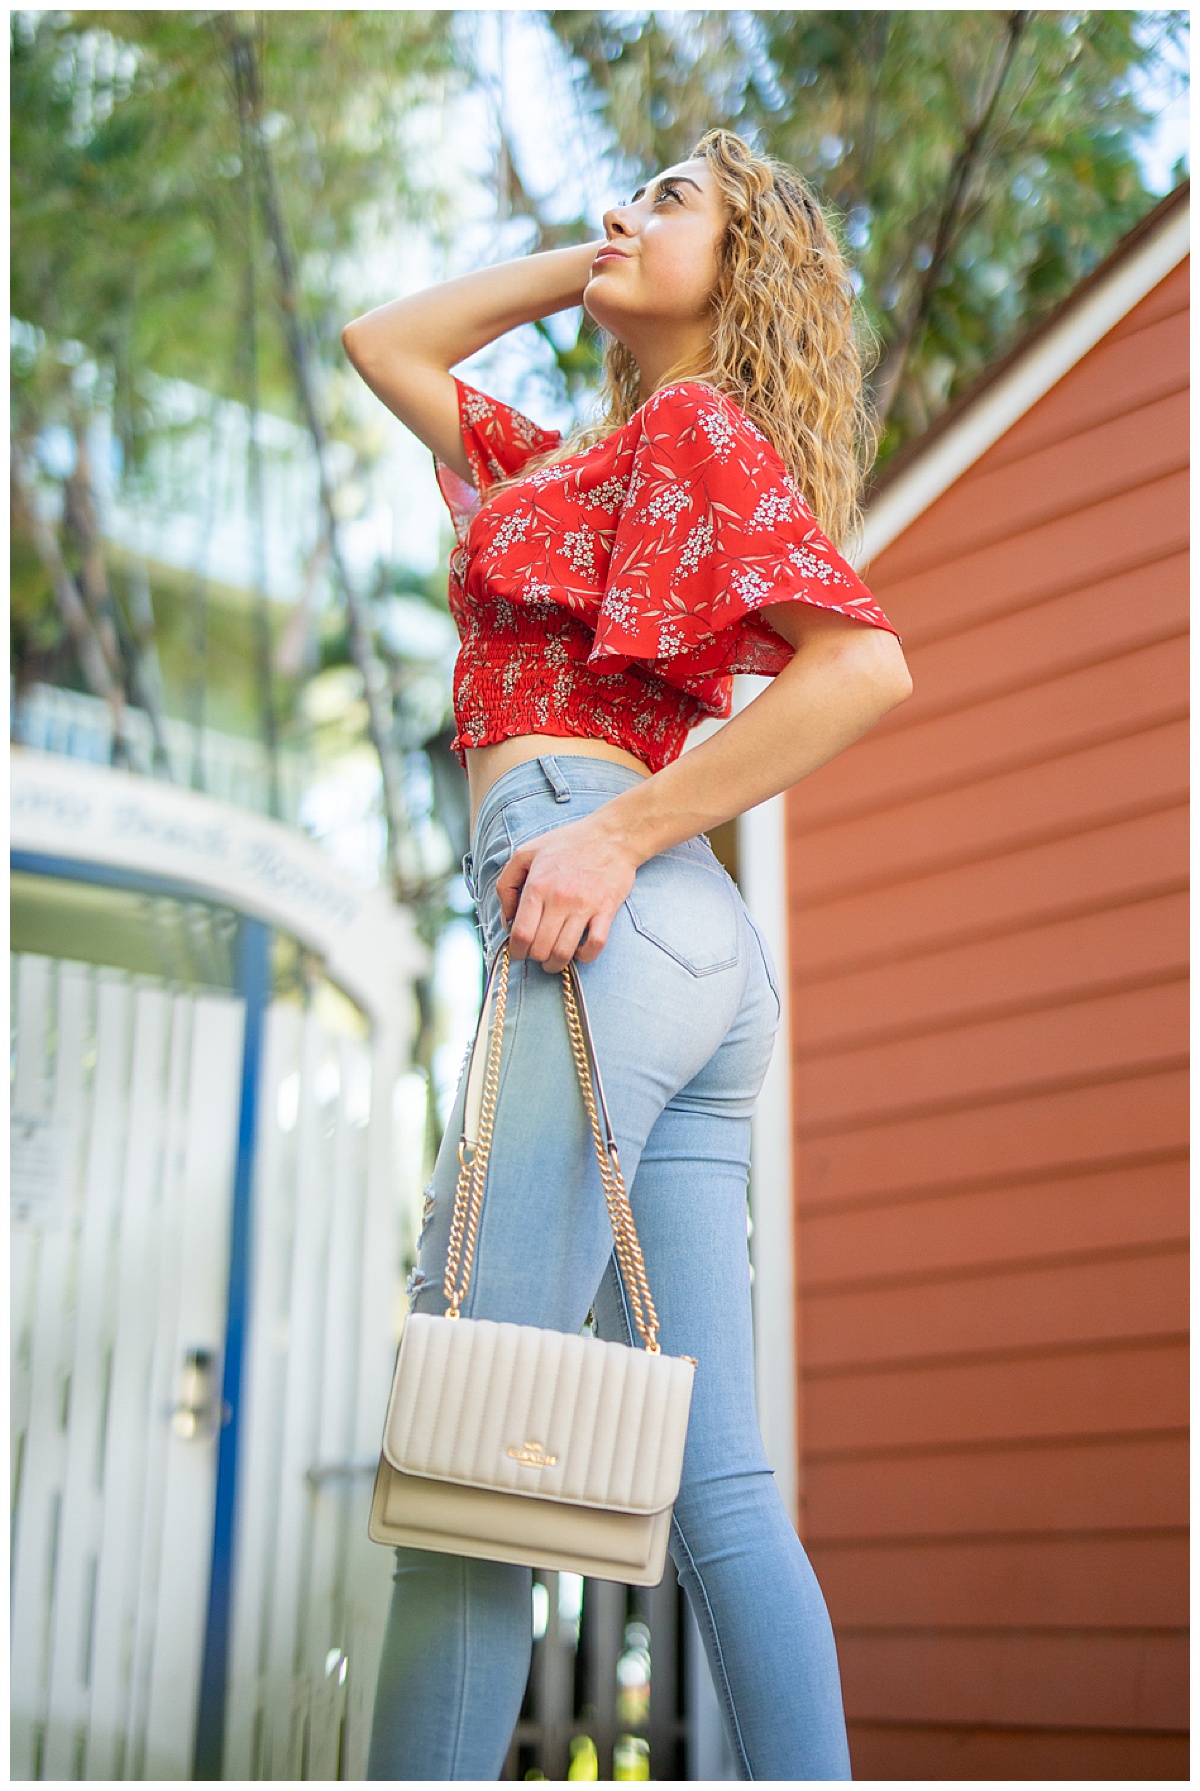 Woman with curly blonde hair wearing a red shirt holds a white Coach purse posing in a fashion photoshoot.